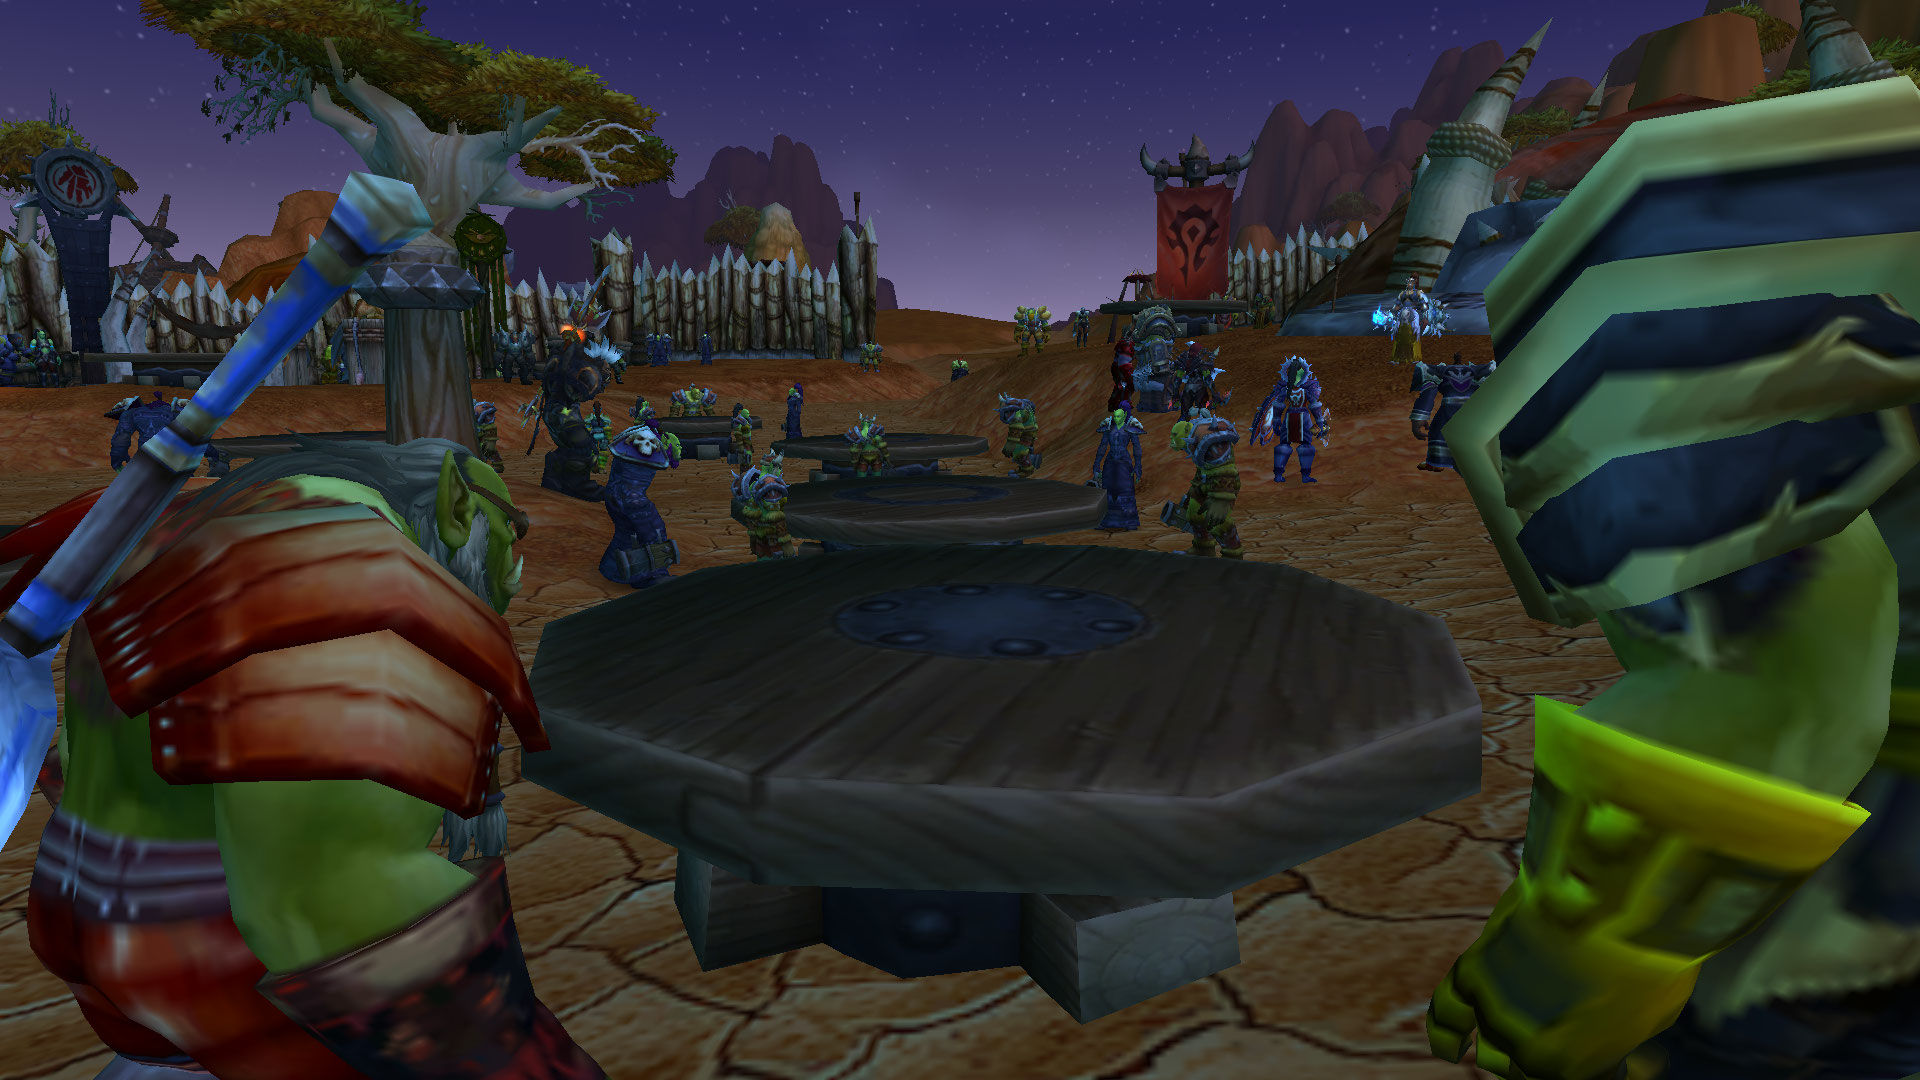 Pvp Vs Pve In World Of Warcraft: Which Is Better?